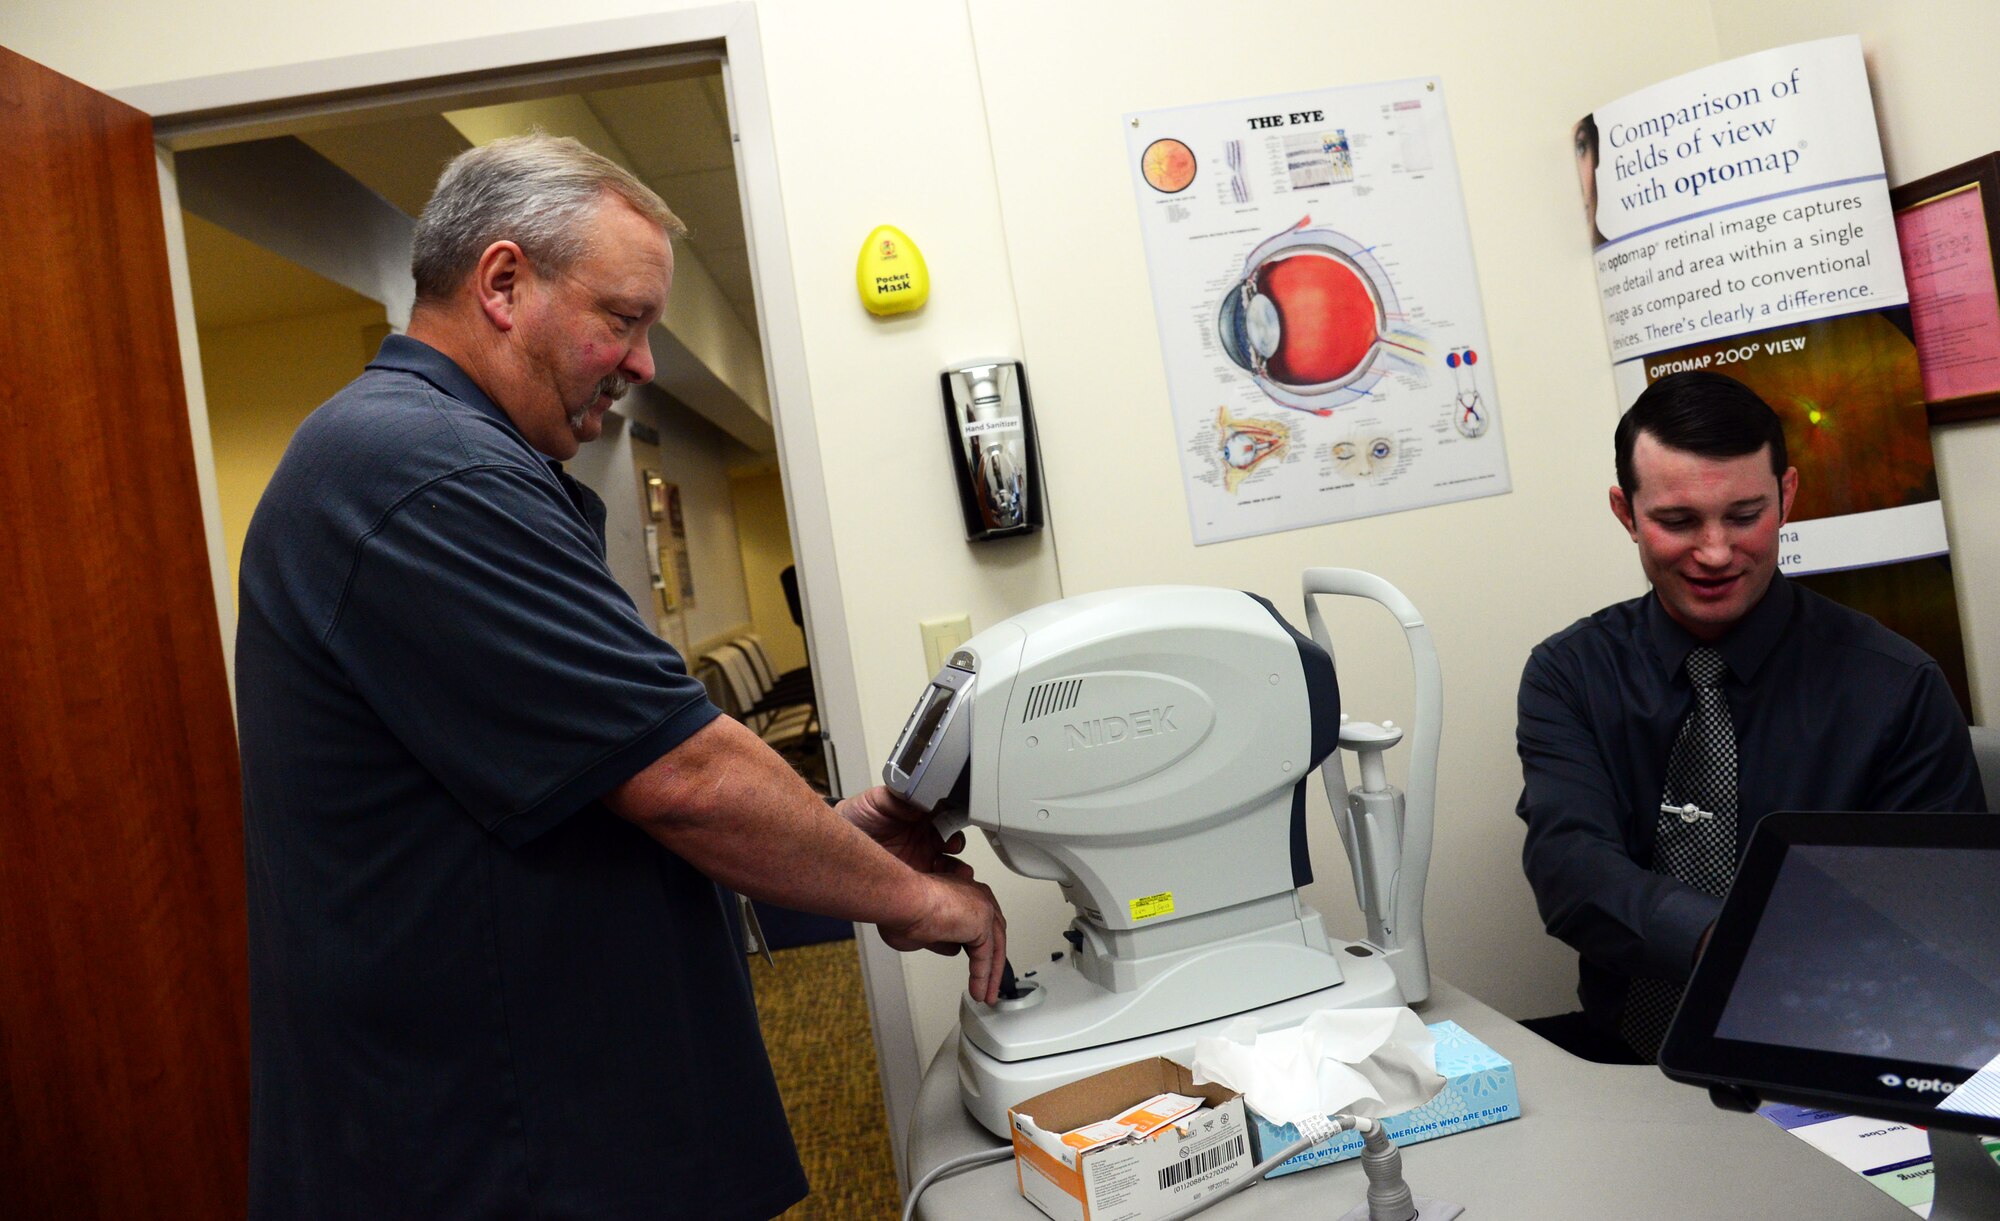 John Dresel, 341st Medical Operations Squadron optometry technician, demonstrates preliminary testing with Tel Todd, former optometry clinic intern, Nov. 2, 2016, at Malmstrom Air Force Base, Mont. Dresel says his primary function in the optometry clinic is to provide excellent customer service and to administer preliminary testing to patients before they are seen by the doctor. (U.S. Air Force photo/Airman 1st Class Magen M. Reeves)